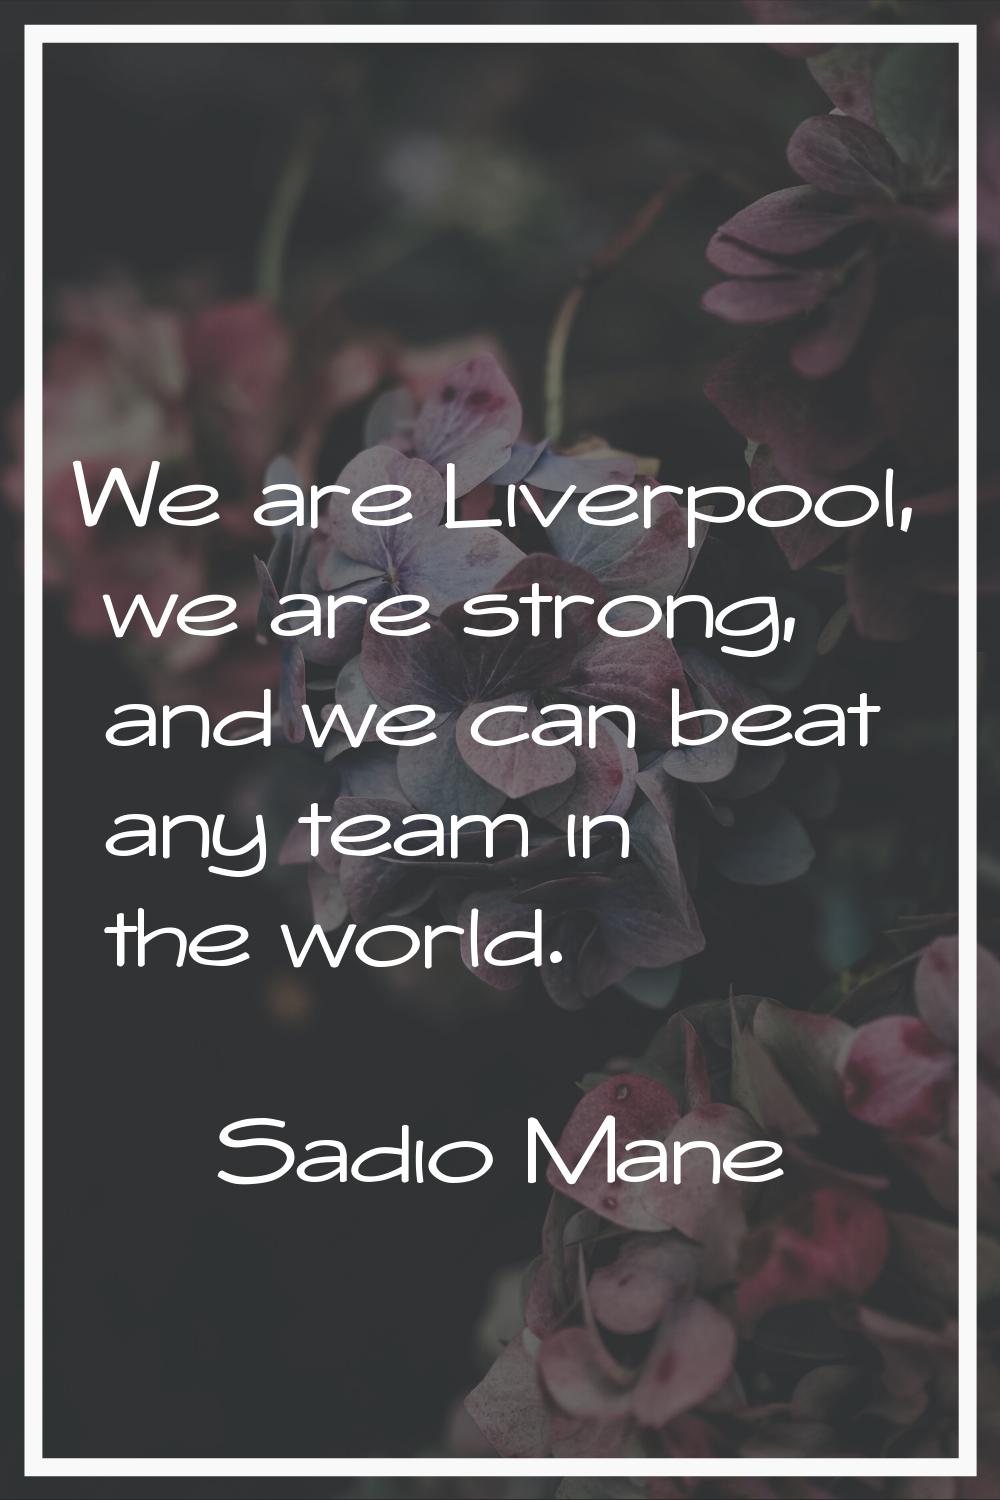 We are Liverpool, we are strong, and we can beat any team in the world.